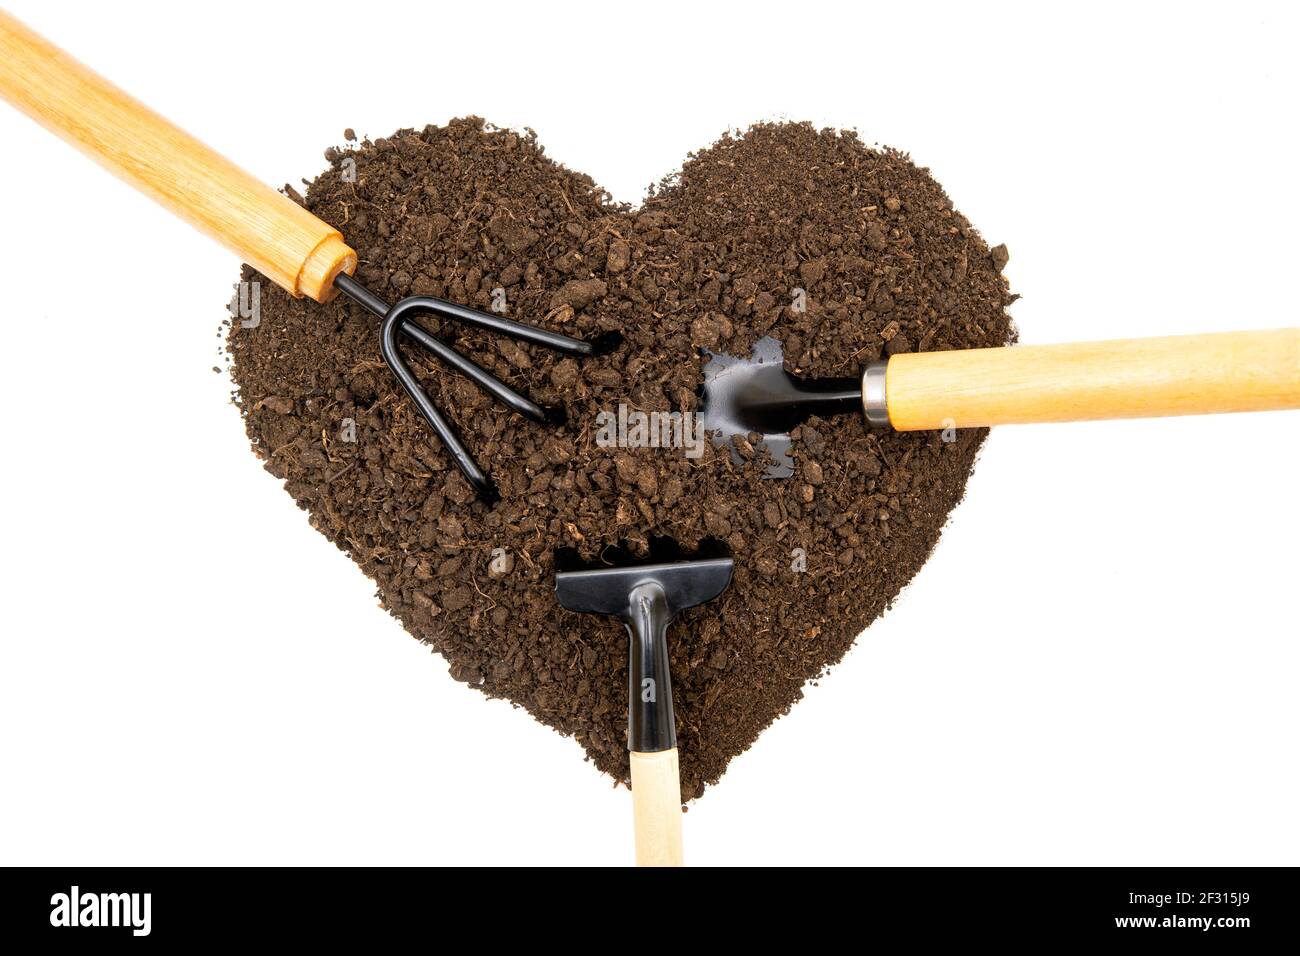 Various garden hand tools in a heart-shaped pile of soil isolated on white background. Gardening obsession concept. Stock Photo